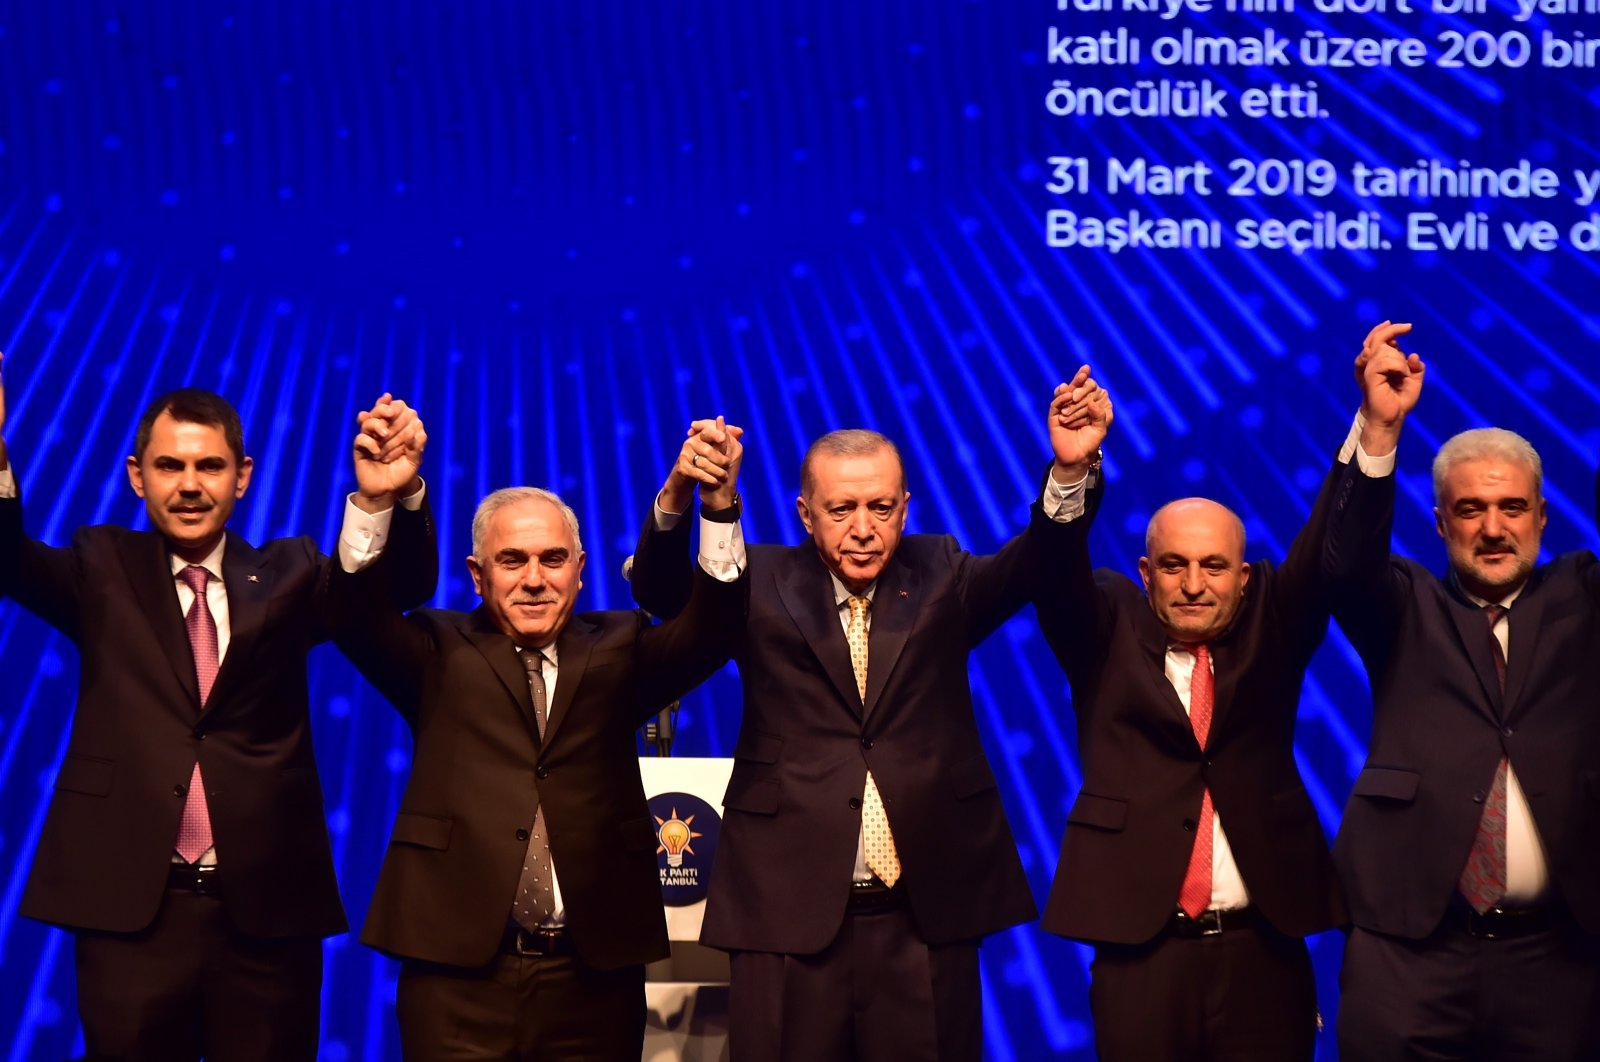 President Recep Tayyip Erdoğan (C) poses with Istanbul district candidates of the Justice and Development Party (AK Party) at an event, Istanbul, Türkiye, Jan. 20, 2024. (İHA Photo)